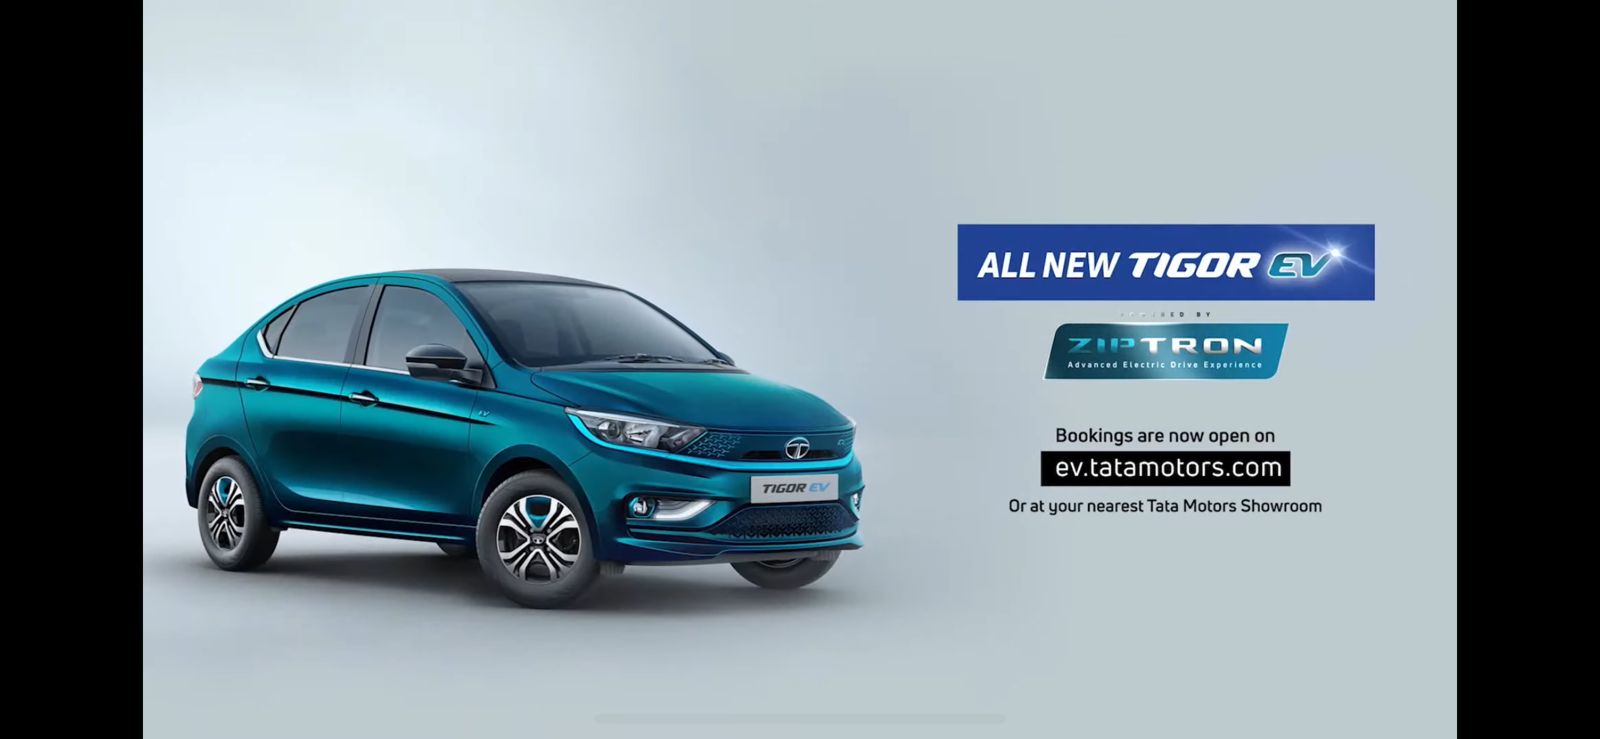 <p>Pre booking for the Tigor EV&nbsp;has started online or at any Tata Motors showroom. The Tigor EV will go on sale on August 31&nbsp;</p>